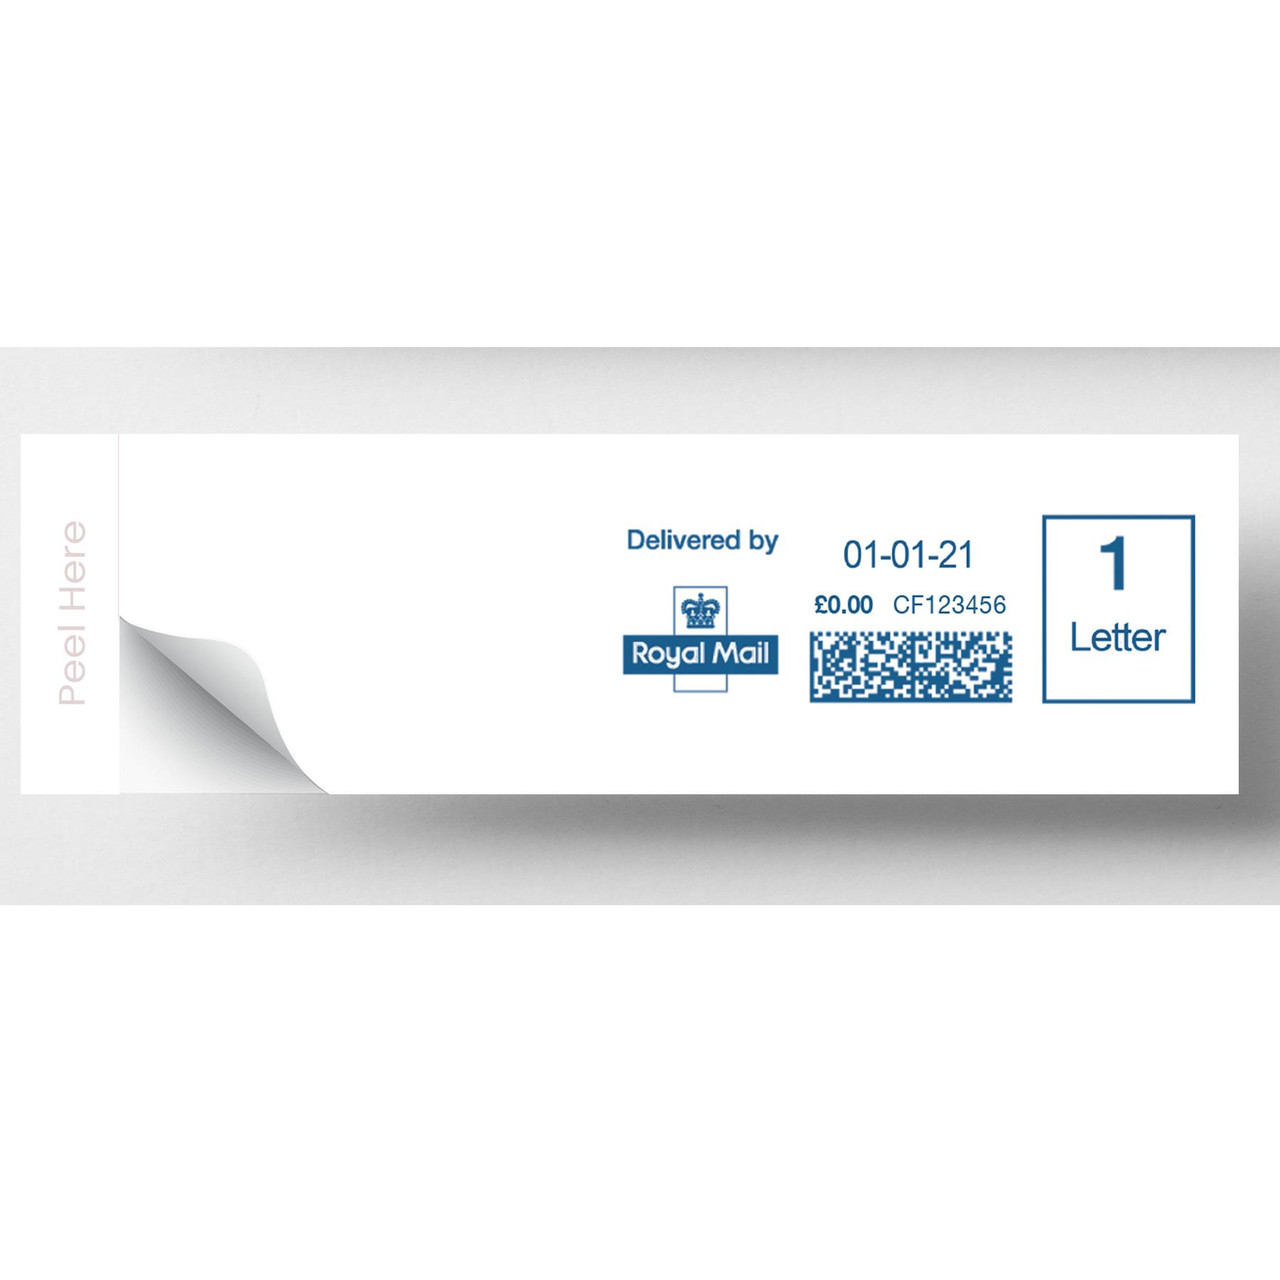 Ascom Hasler Single Strip Franking Machine Labels for Smile, 120 and 220